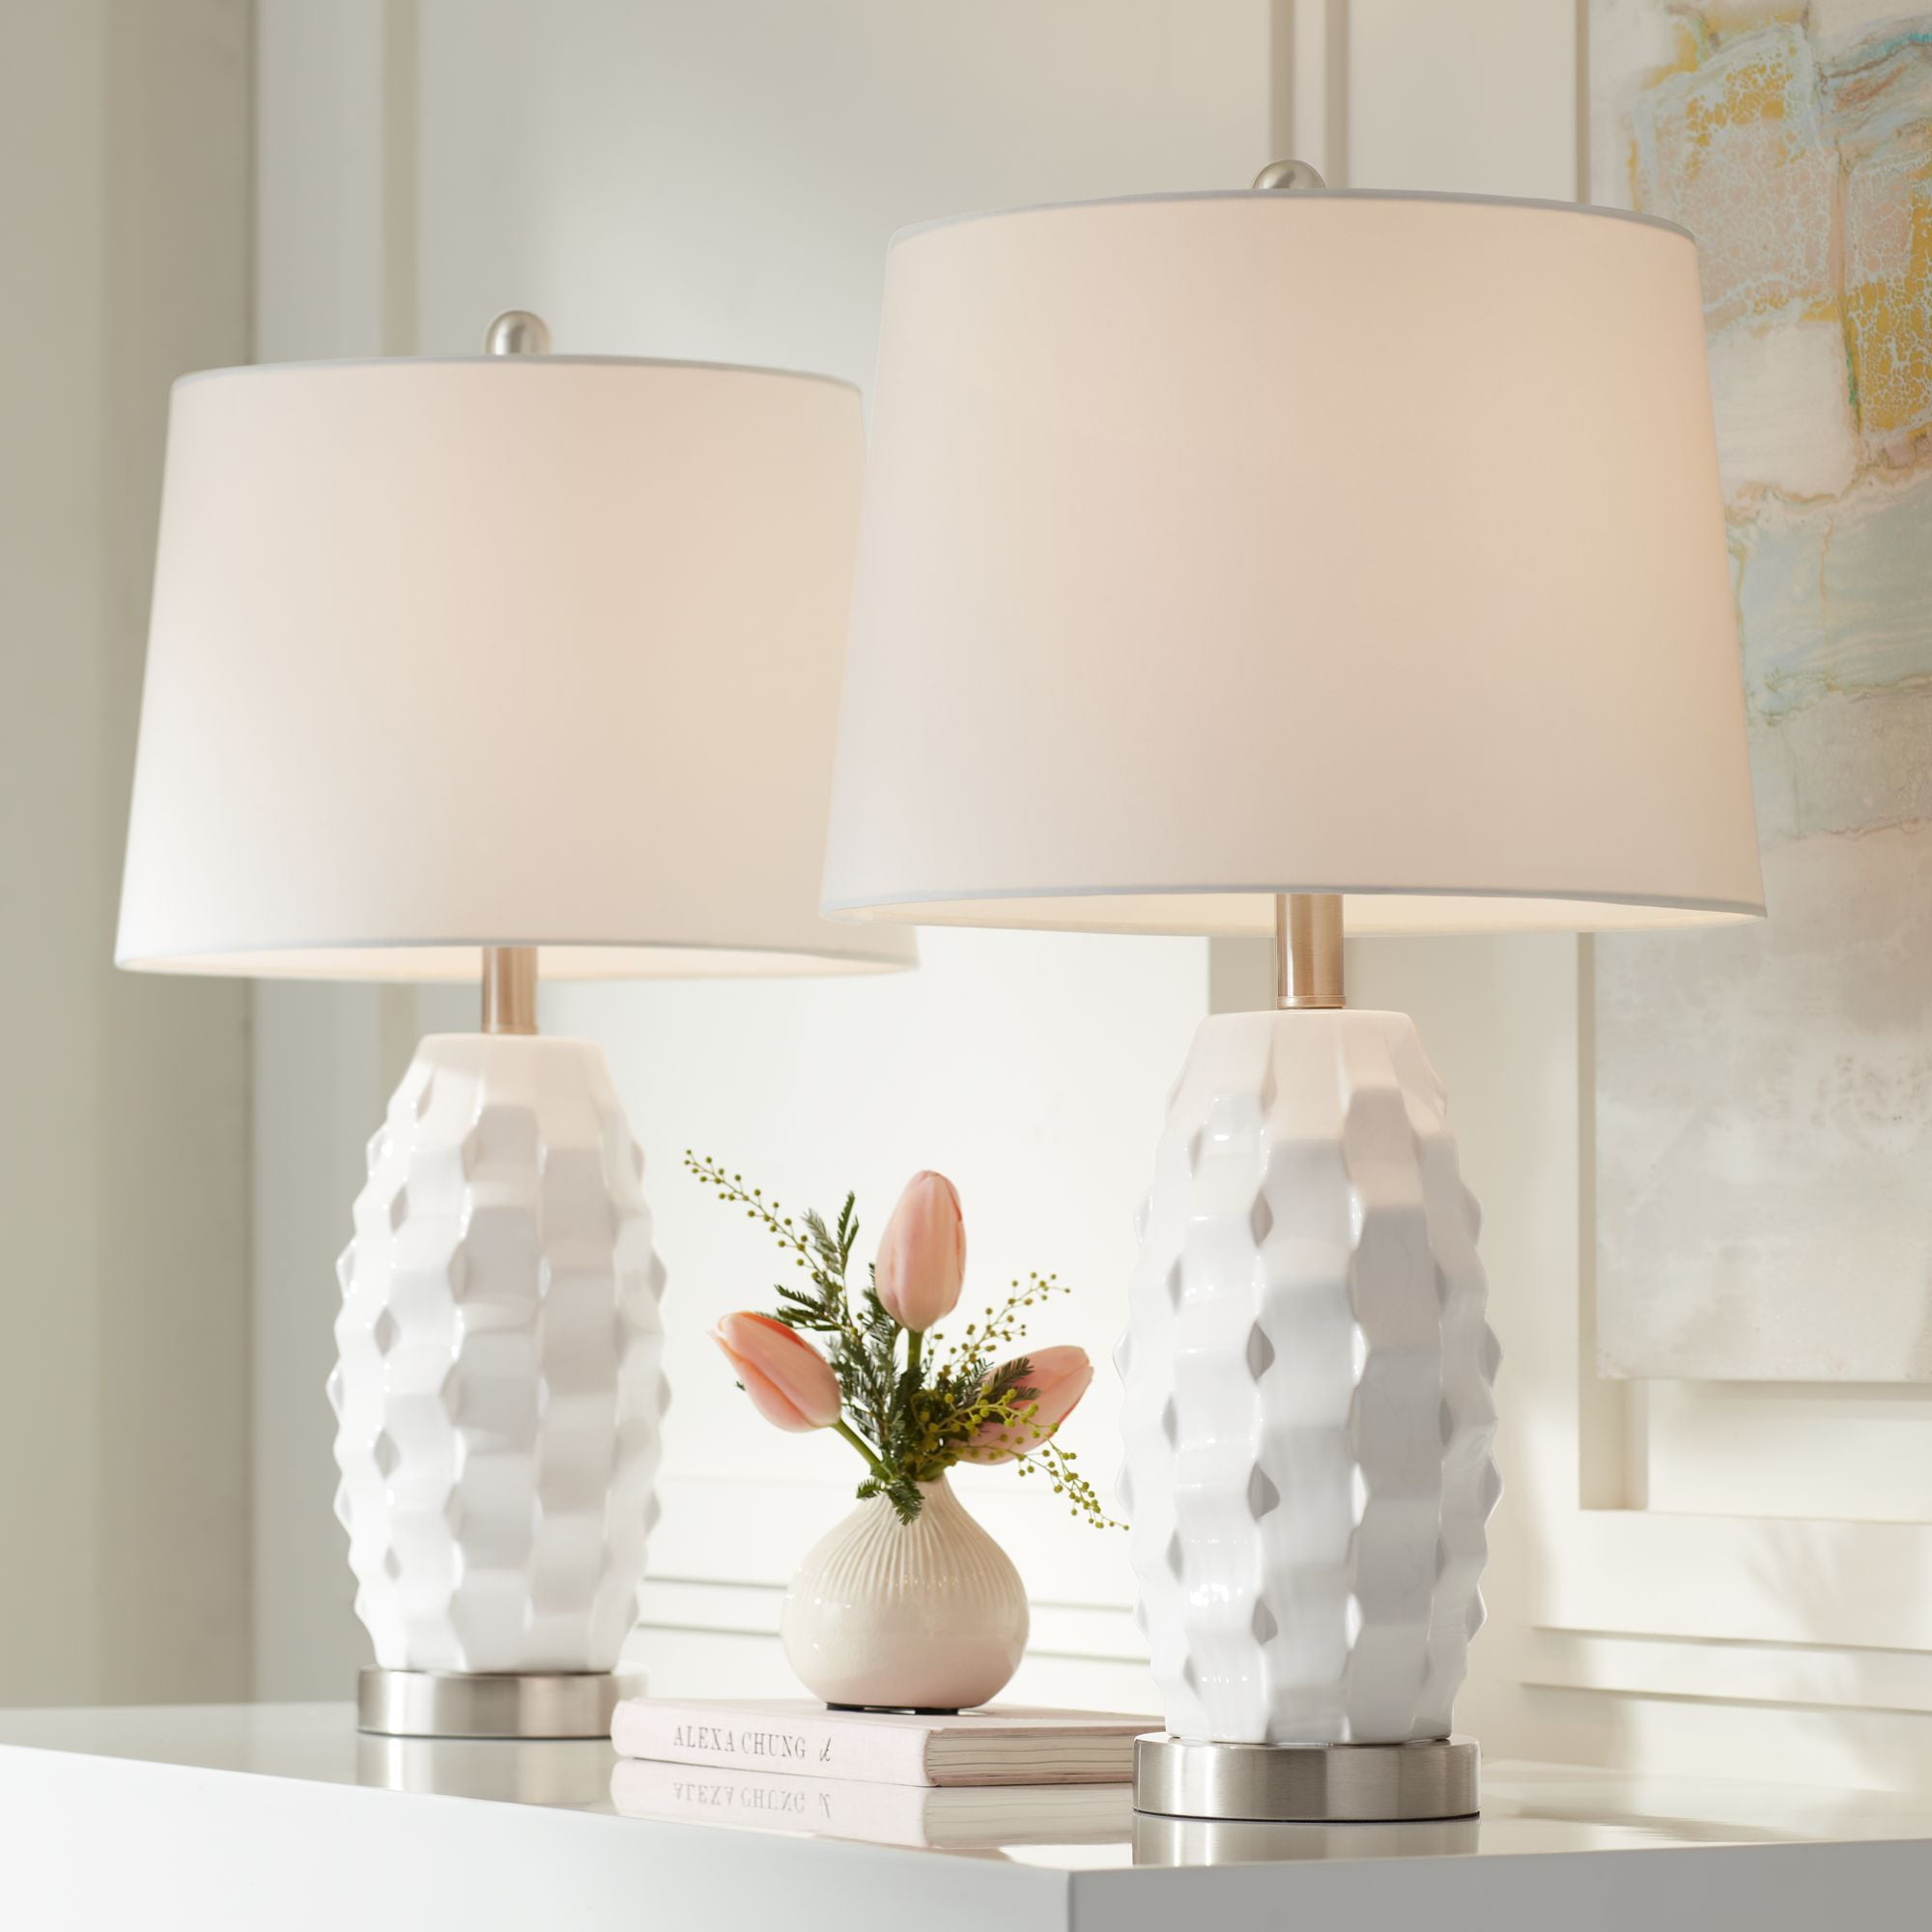 360 Lighting Modern Coastal Accent, Set Of Two Bedside Table Lamps